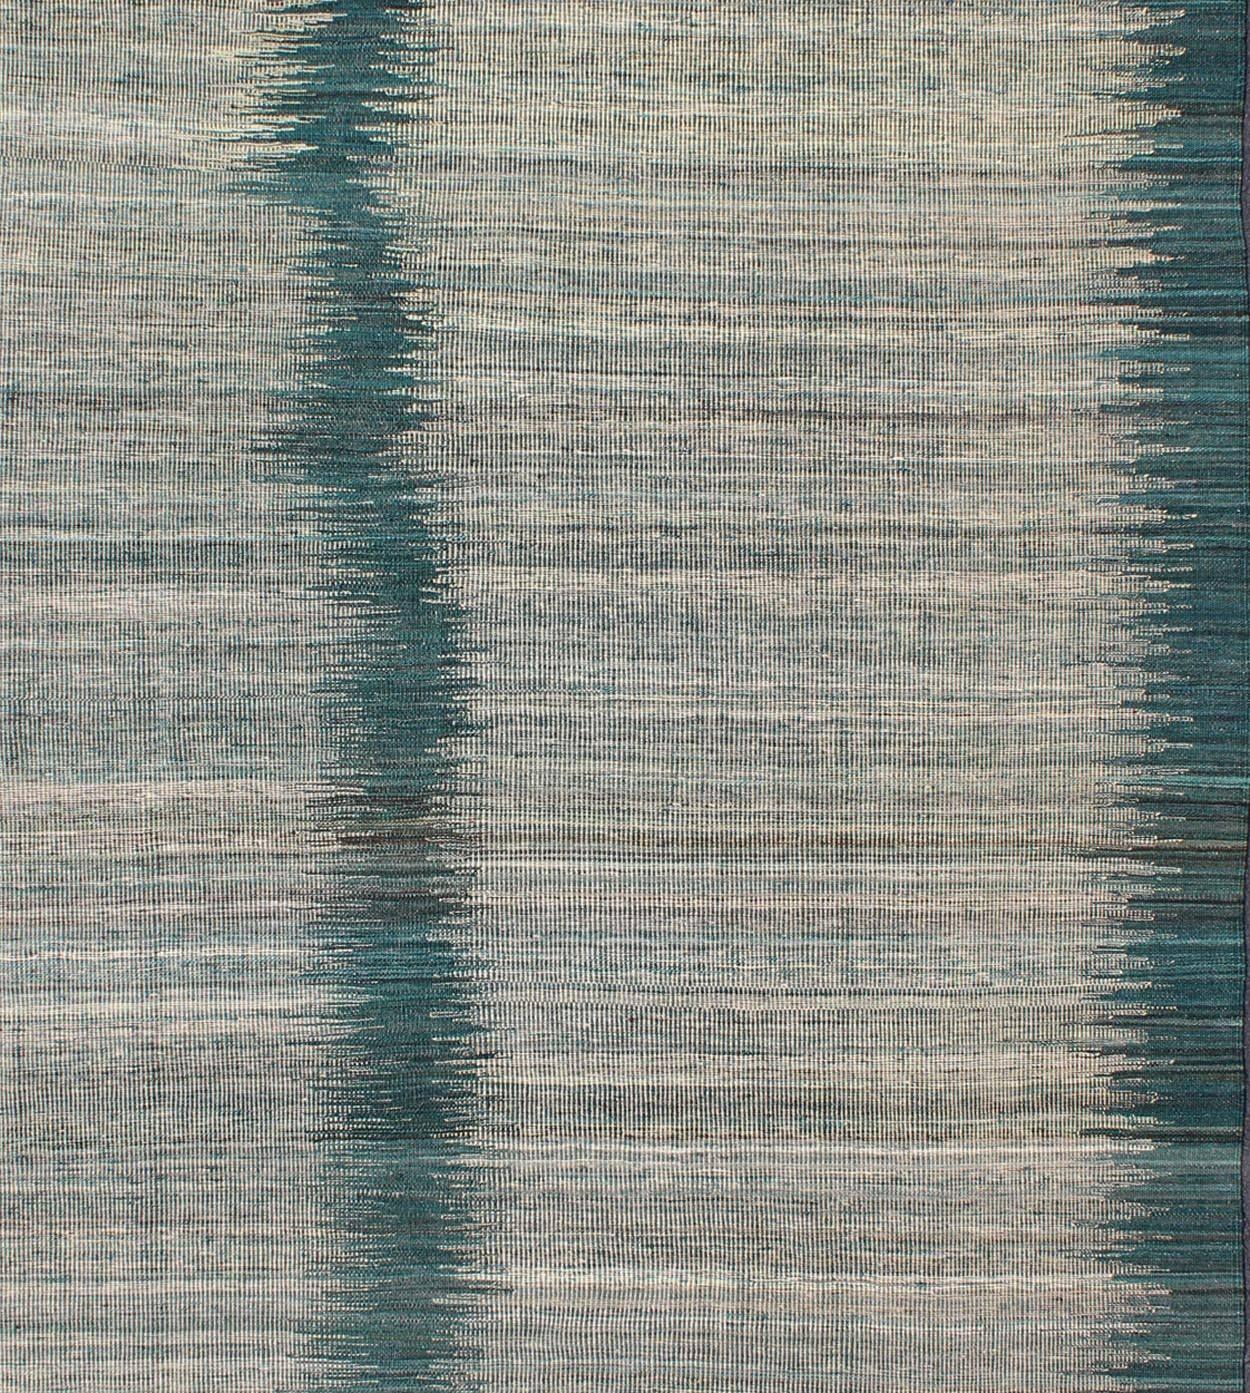 Hand-Woven Modern Design Kilim Rug with Vertical Strip in White, Cream, Gray and Teal For Sale